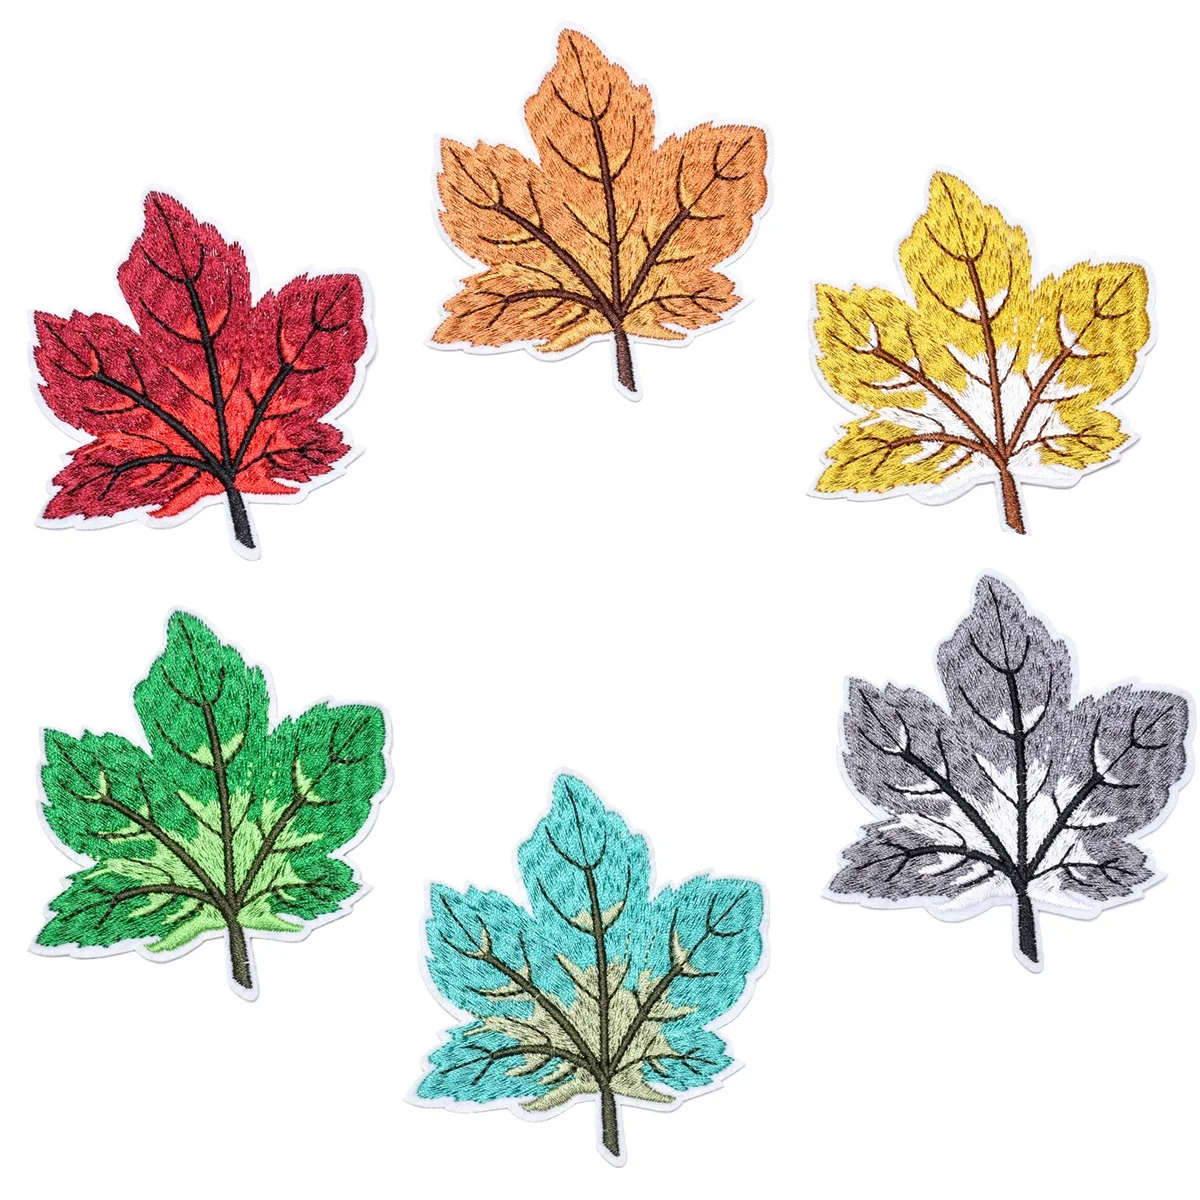 

6Pcs/set Maple Leaf Series For on Clothes DIY Ironing on Embroidered Patches Hat Jeans T-shirt Sew-on Patch Applique Badge